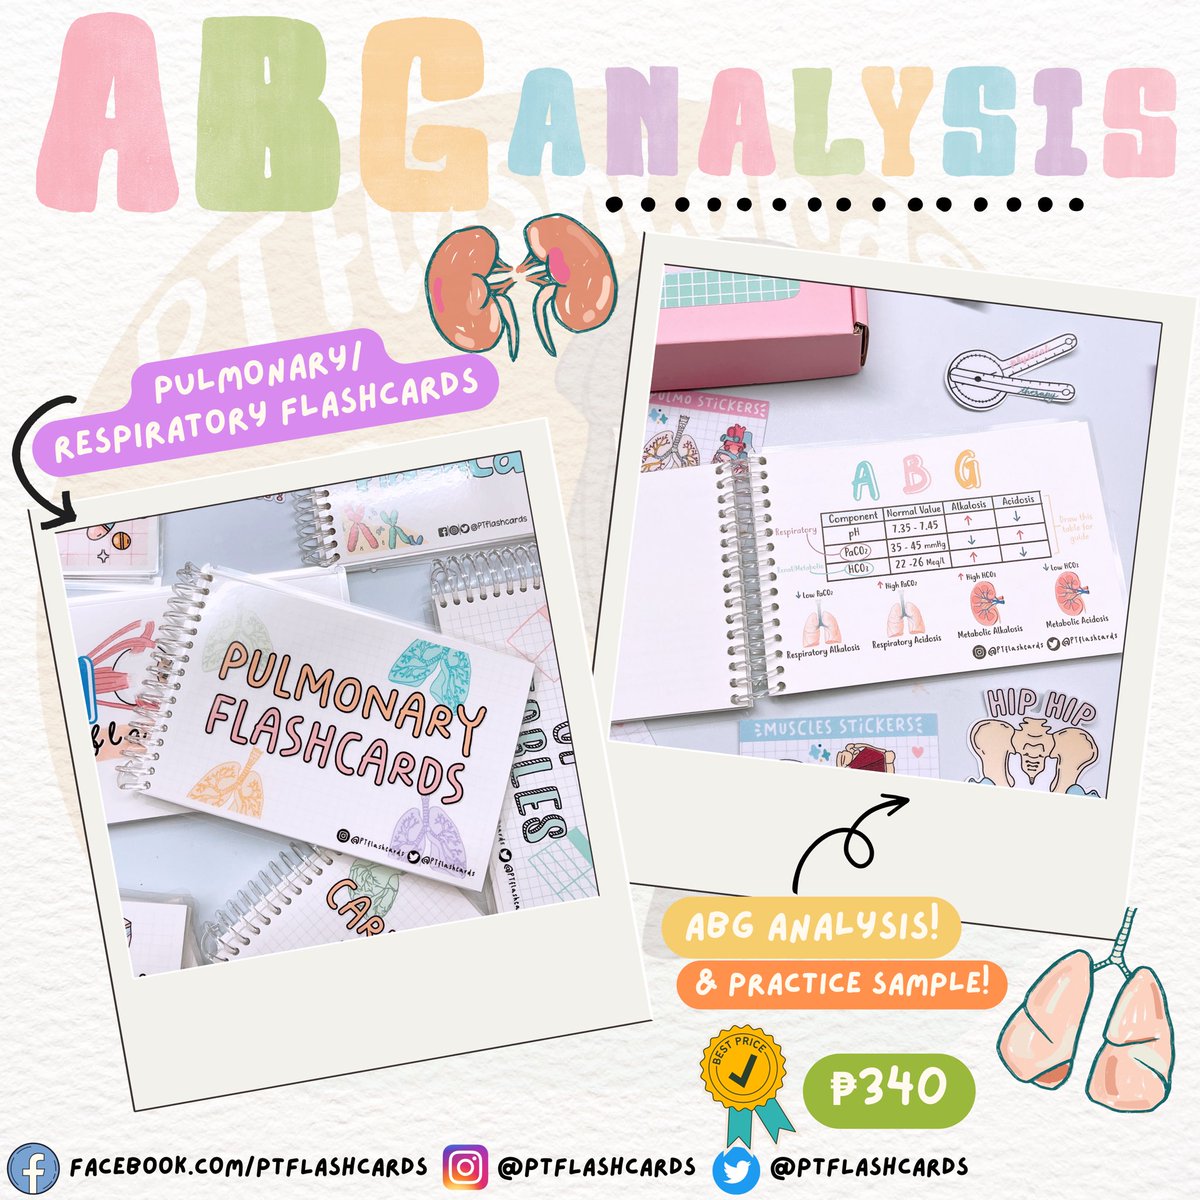 ARTERIAL BLOOD GASES (ABG) ANALYSIS ✨

Happy Studying! 🤍

#pulmonary #respiratory #abganalaysis #physicaltherapy #medtwitter #medicine #medstudent #arterialbloodgases #studygram #infographics #studymaterials